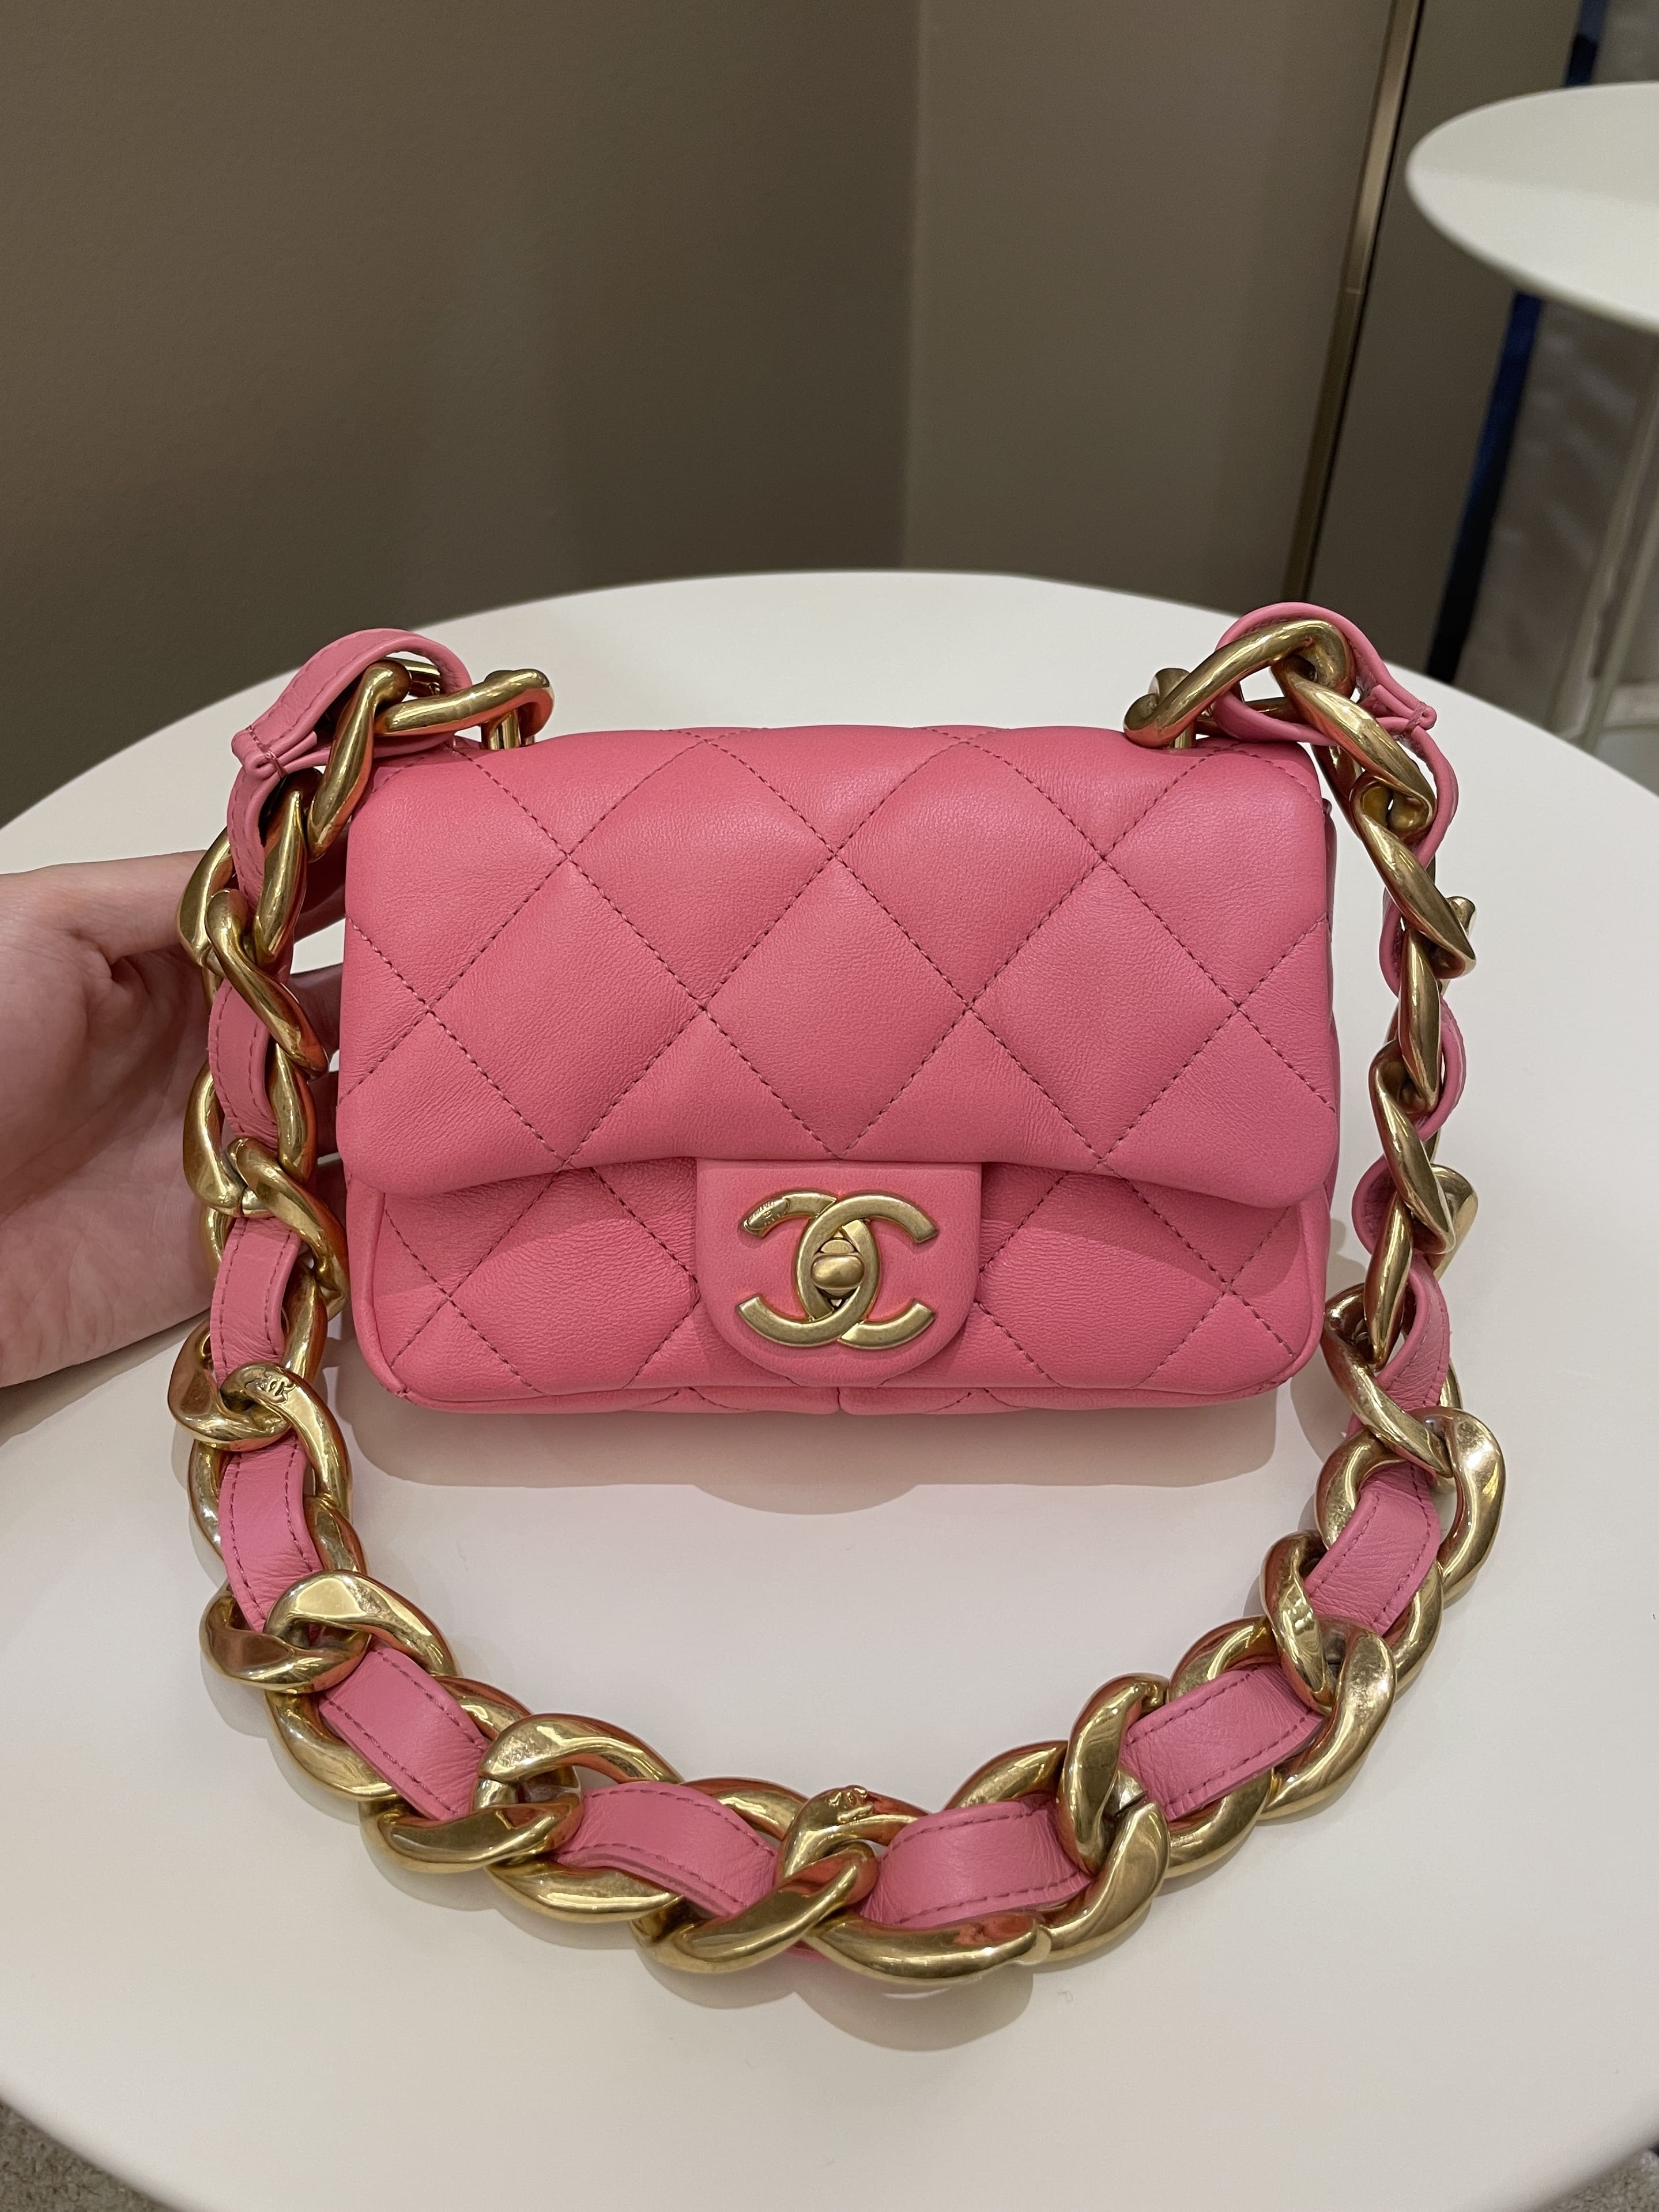 Chanel 22 Handbag 22S Calfskin Coral Pink in Calfskin Leather with  Goldtone  US